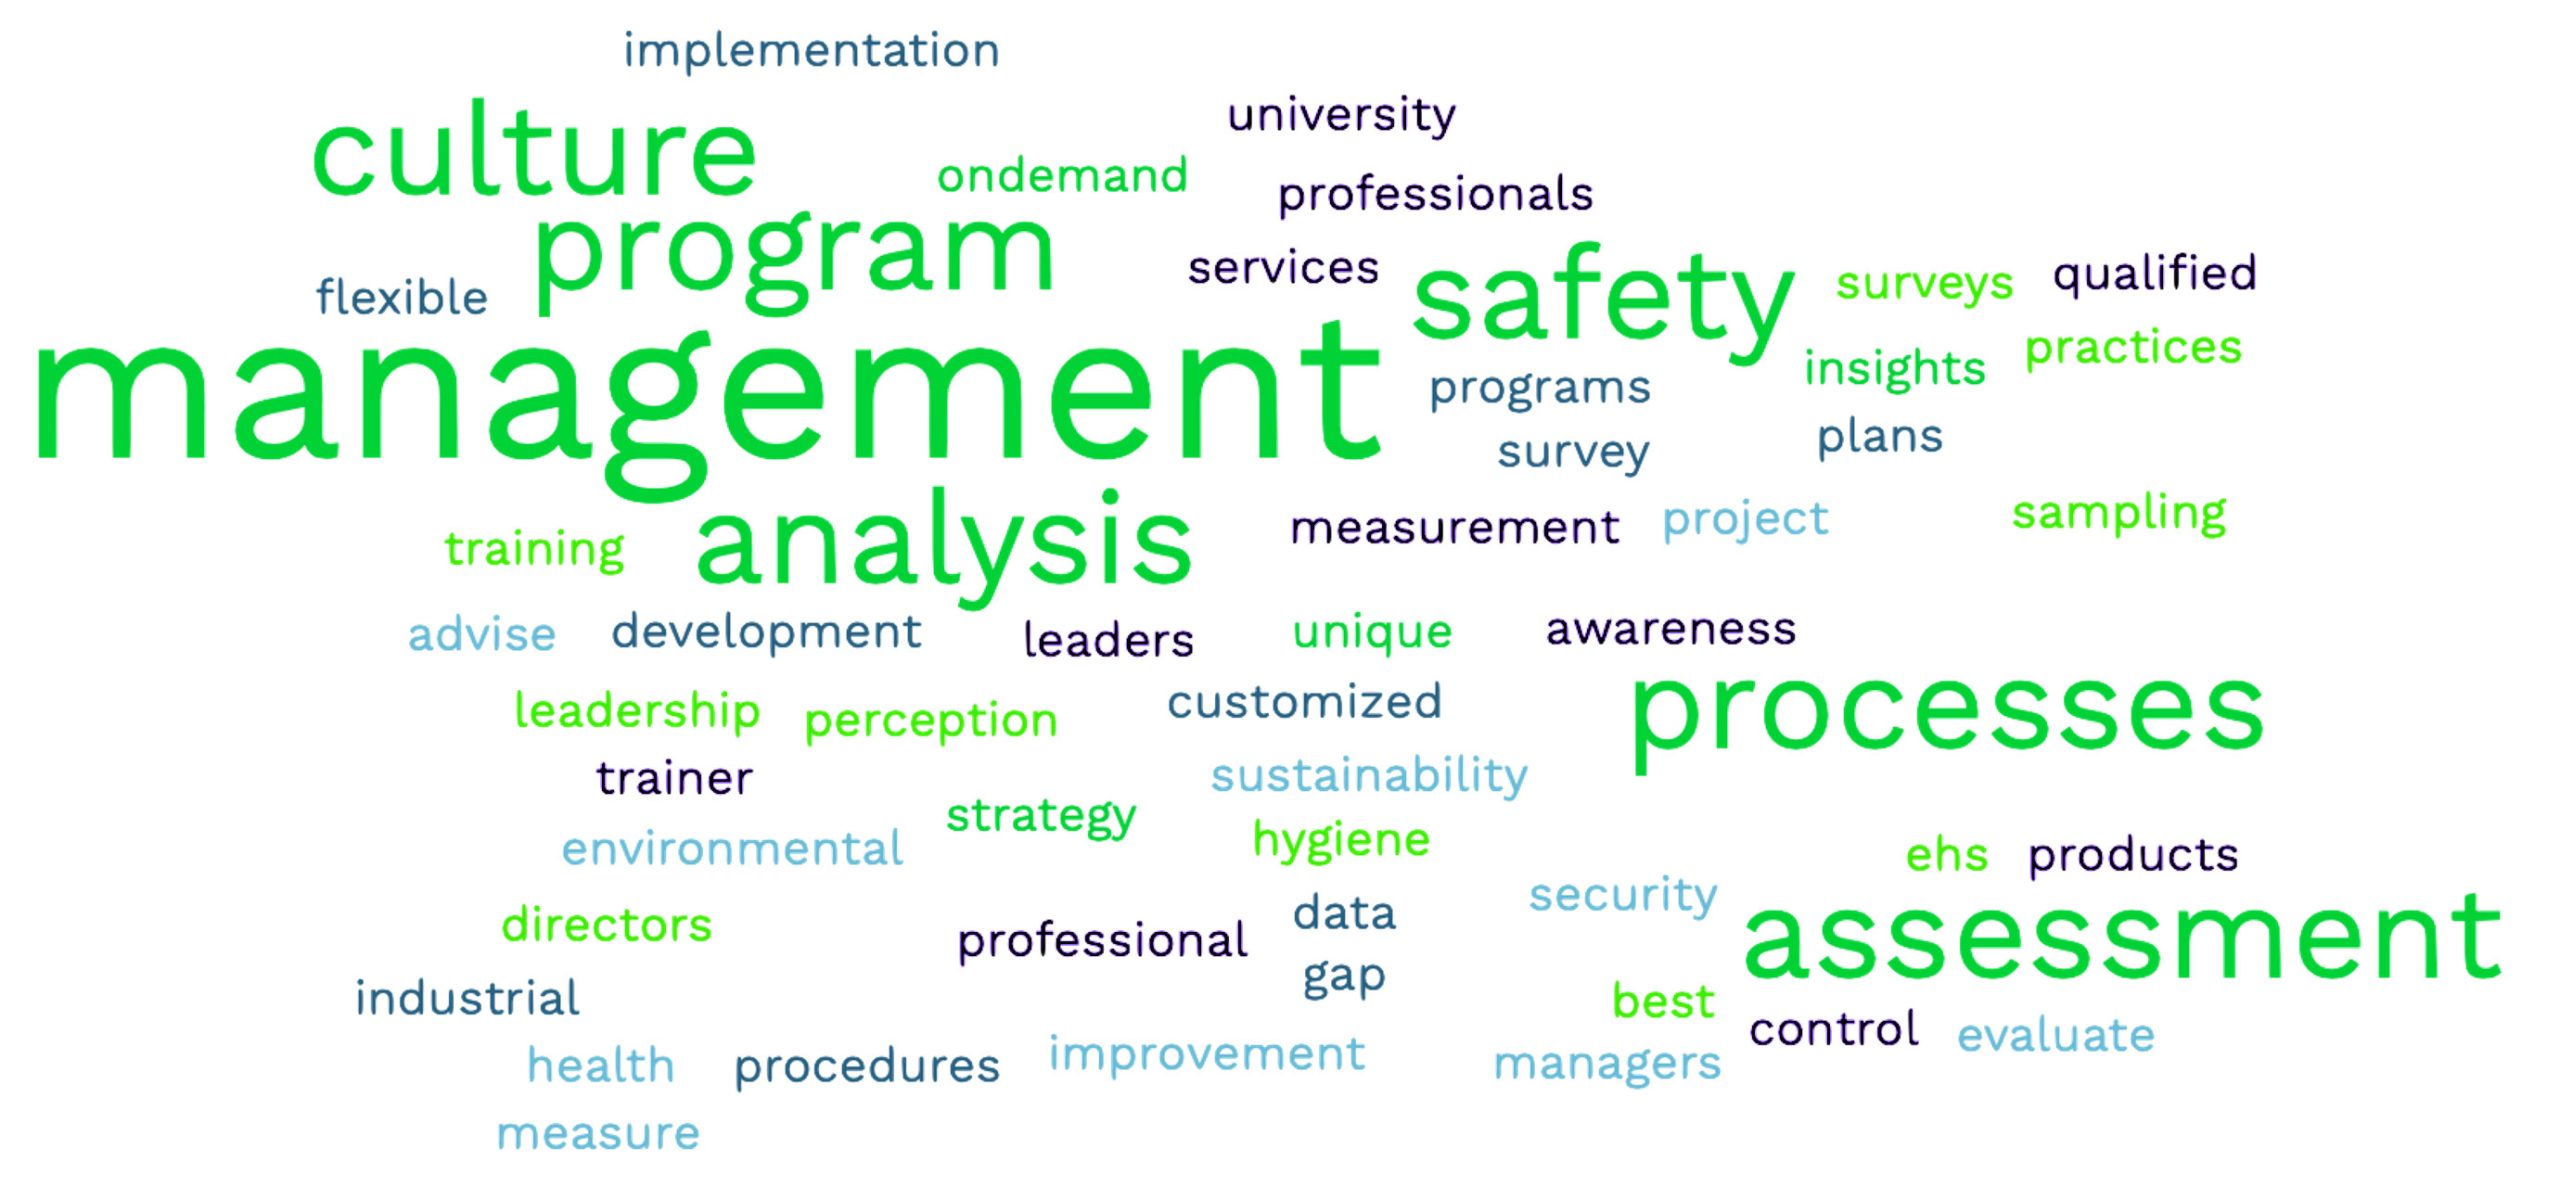 About SMG - Safety Management Group